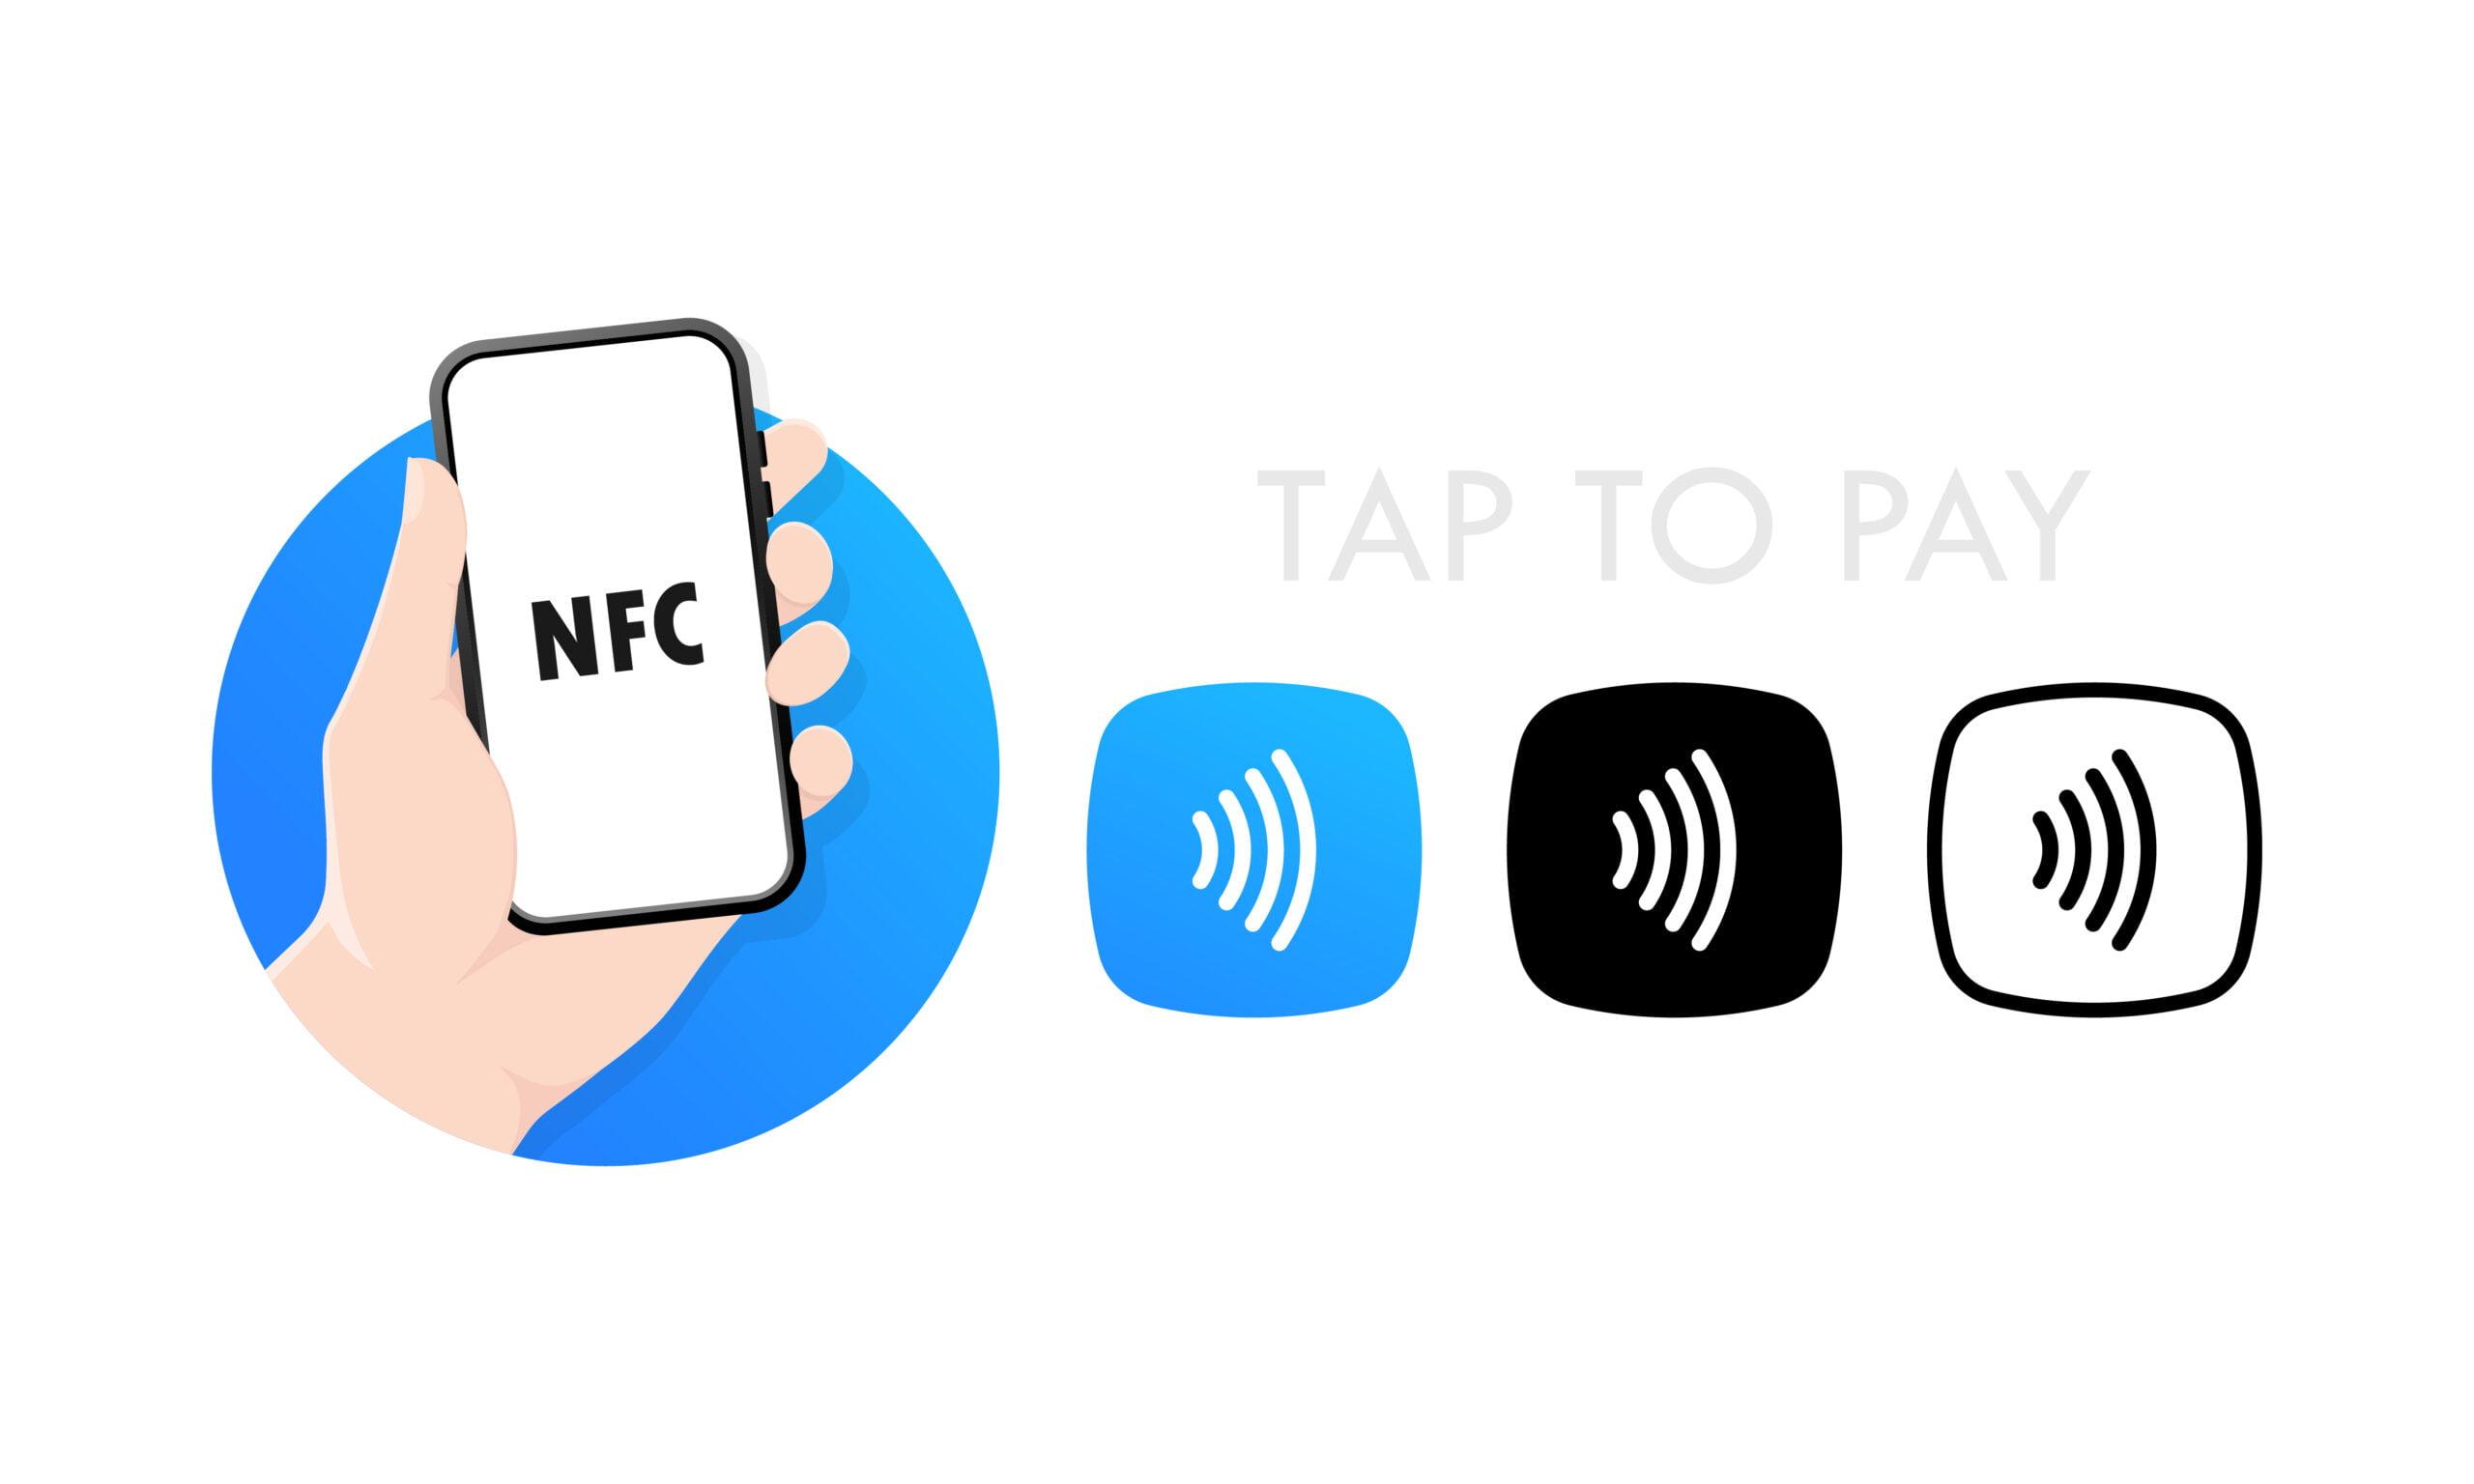 nfc technology in a smartphone. tap to pay. contactless wireless pay sign logo. vector illustration.